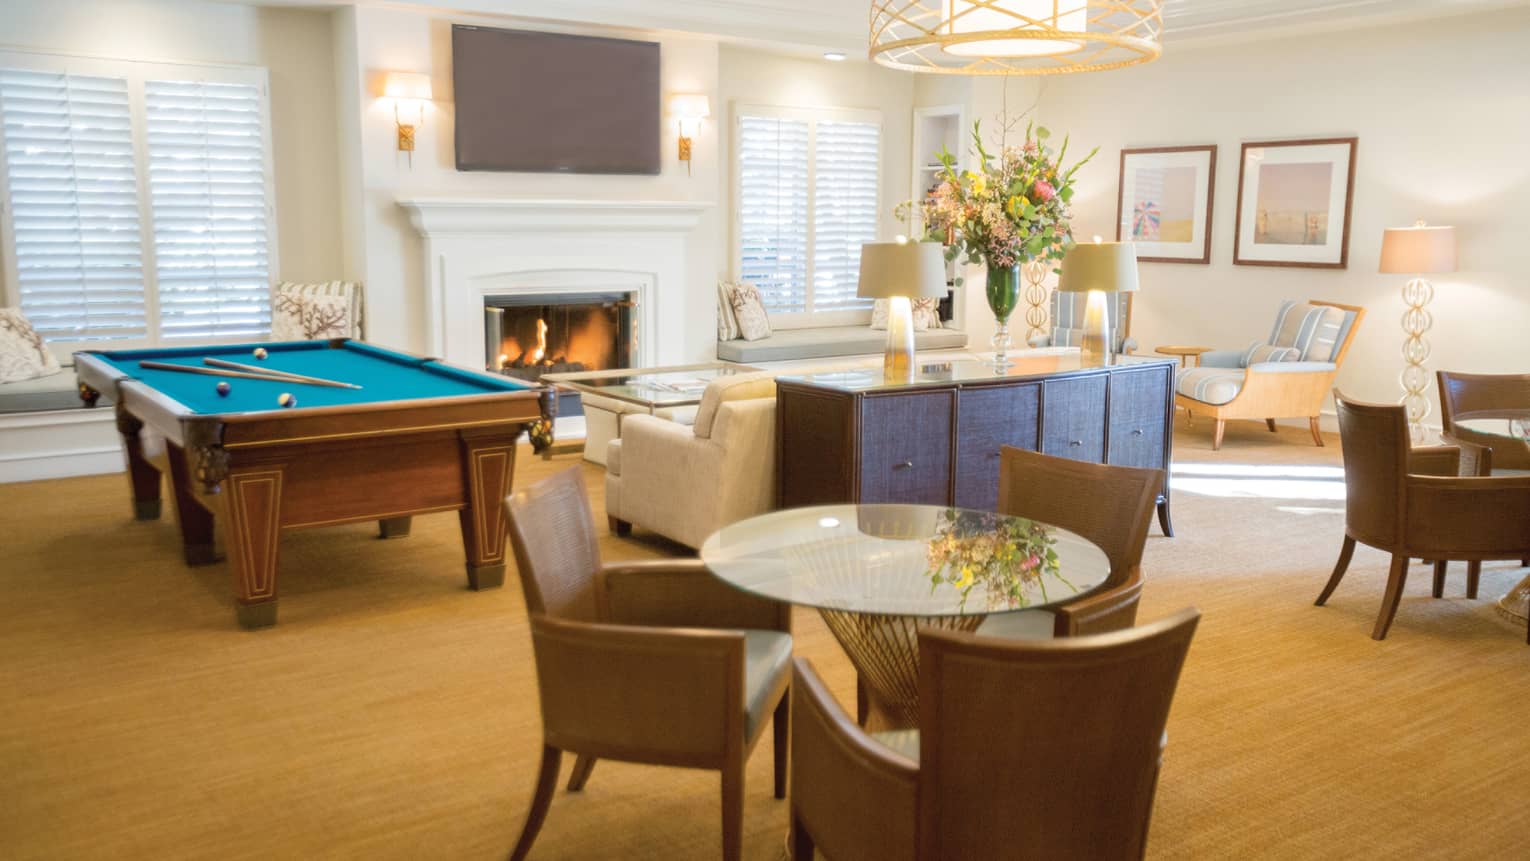 Hotel recreation lounge with pool table, fireplace and sofa, round glass tables with chairs 